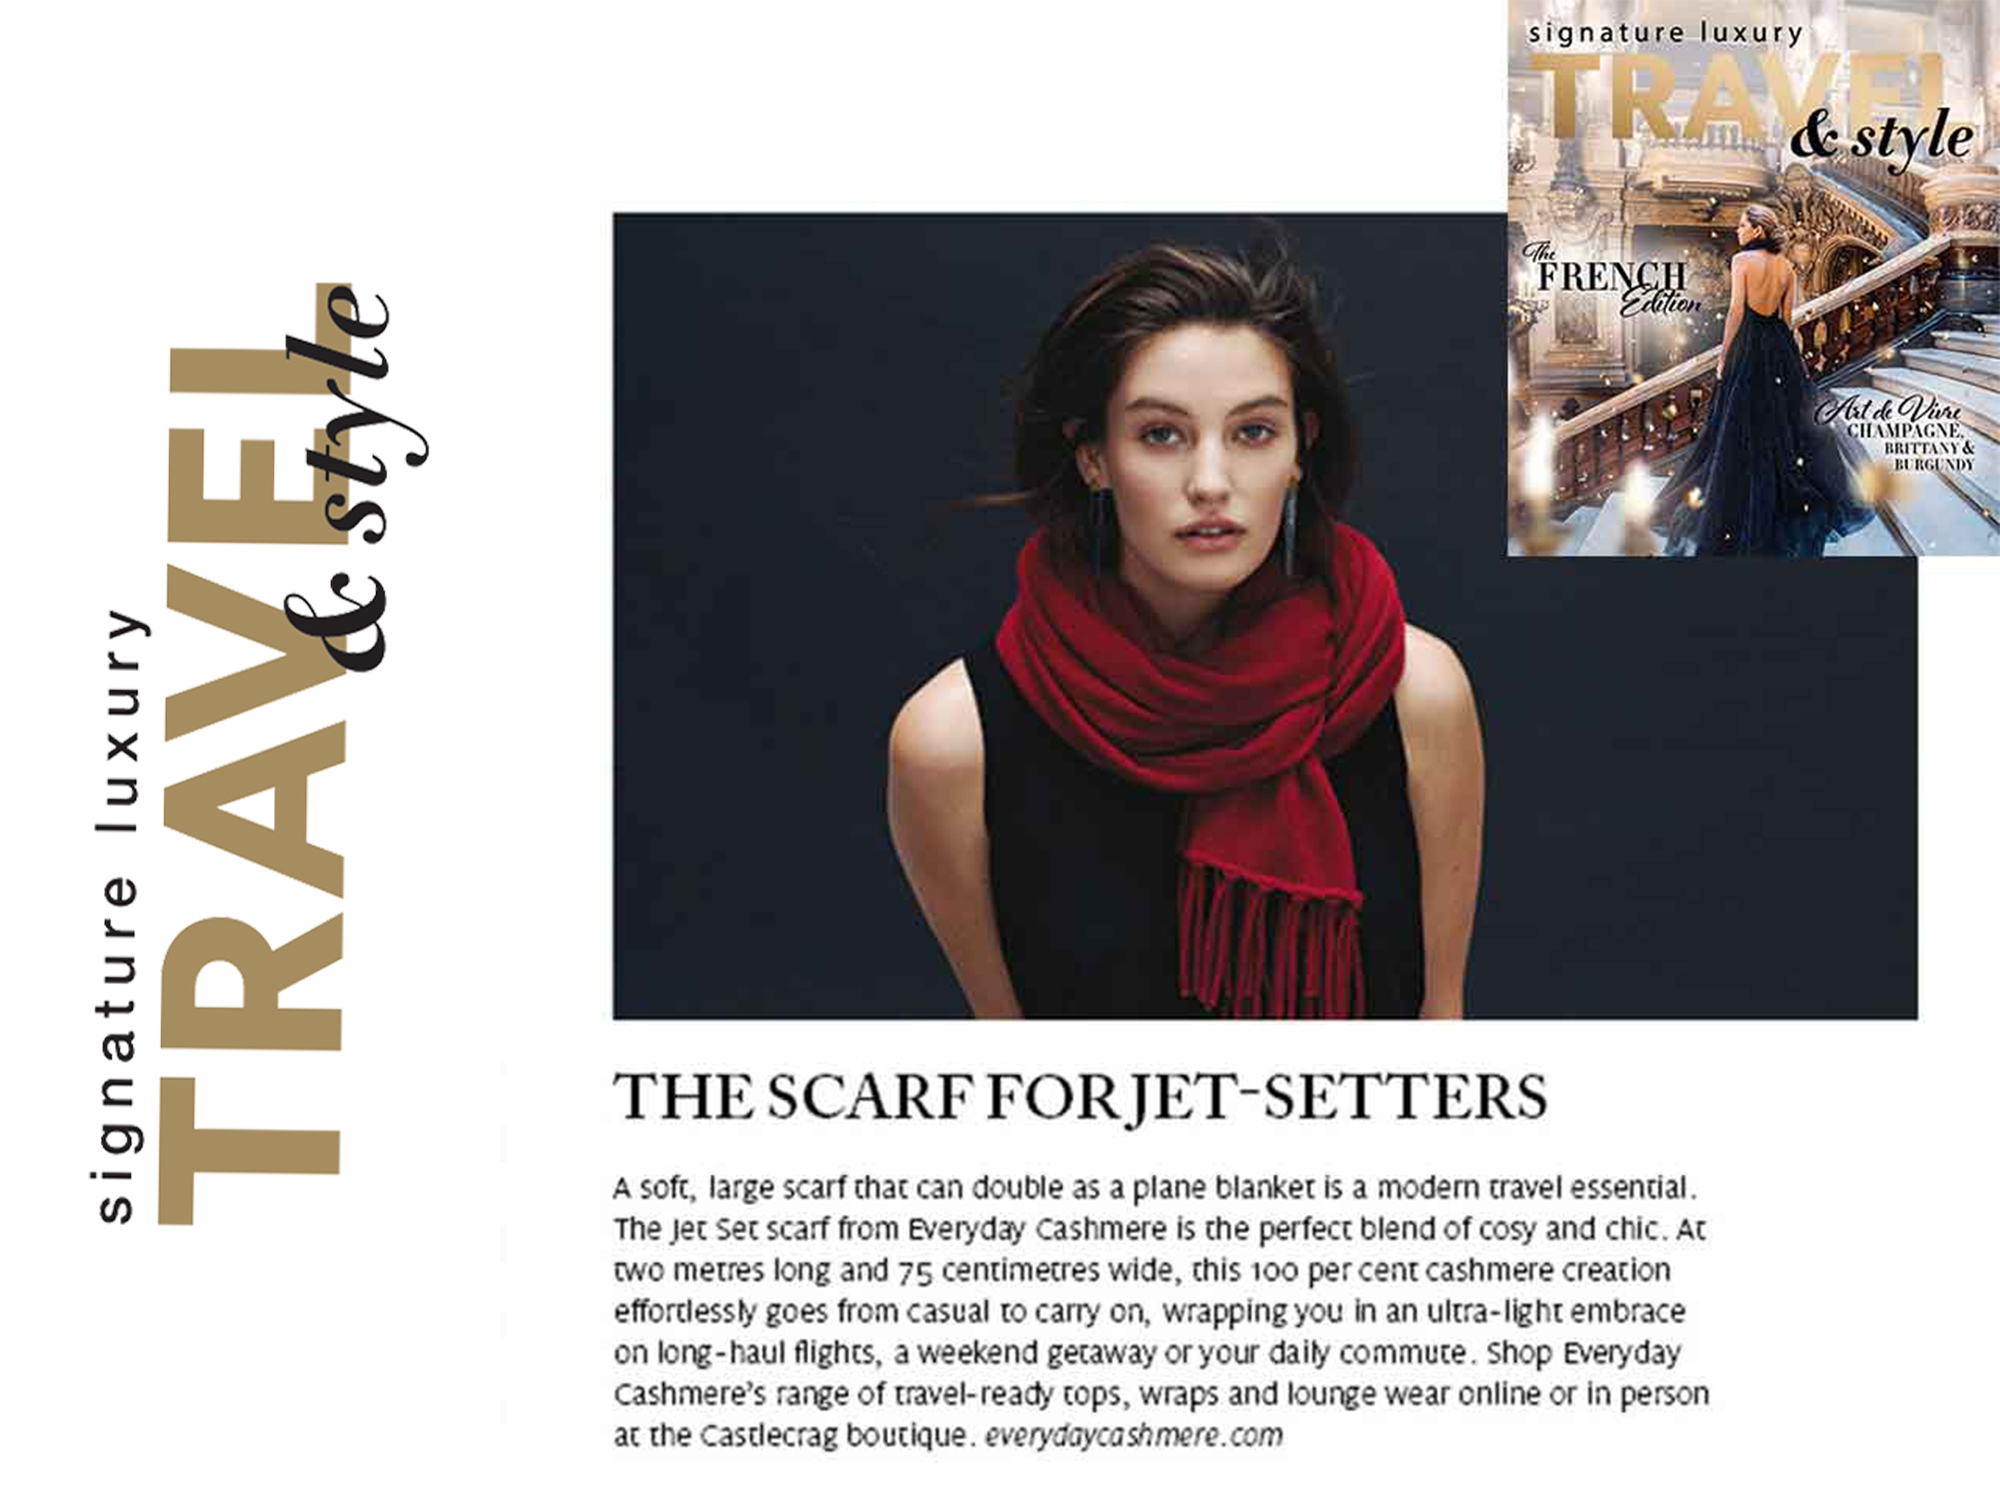 "The Scarf for Jet Setters" - says Signature Luxury Travel & Style 